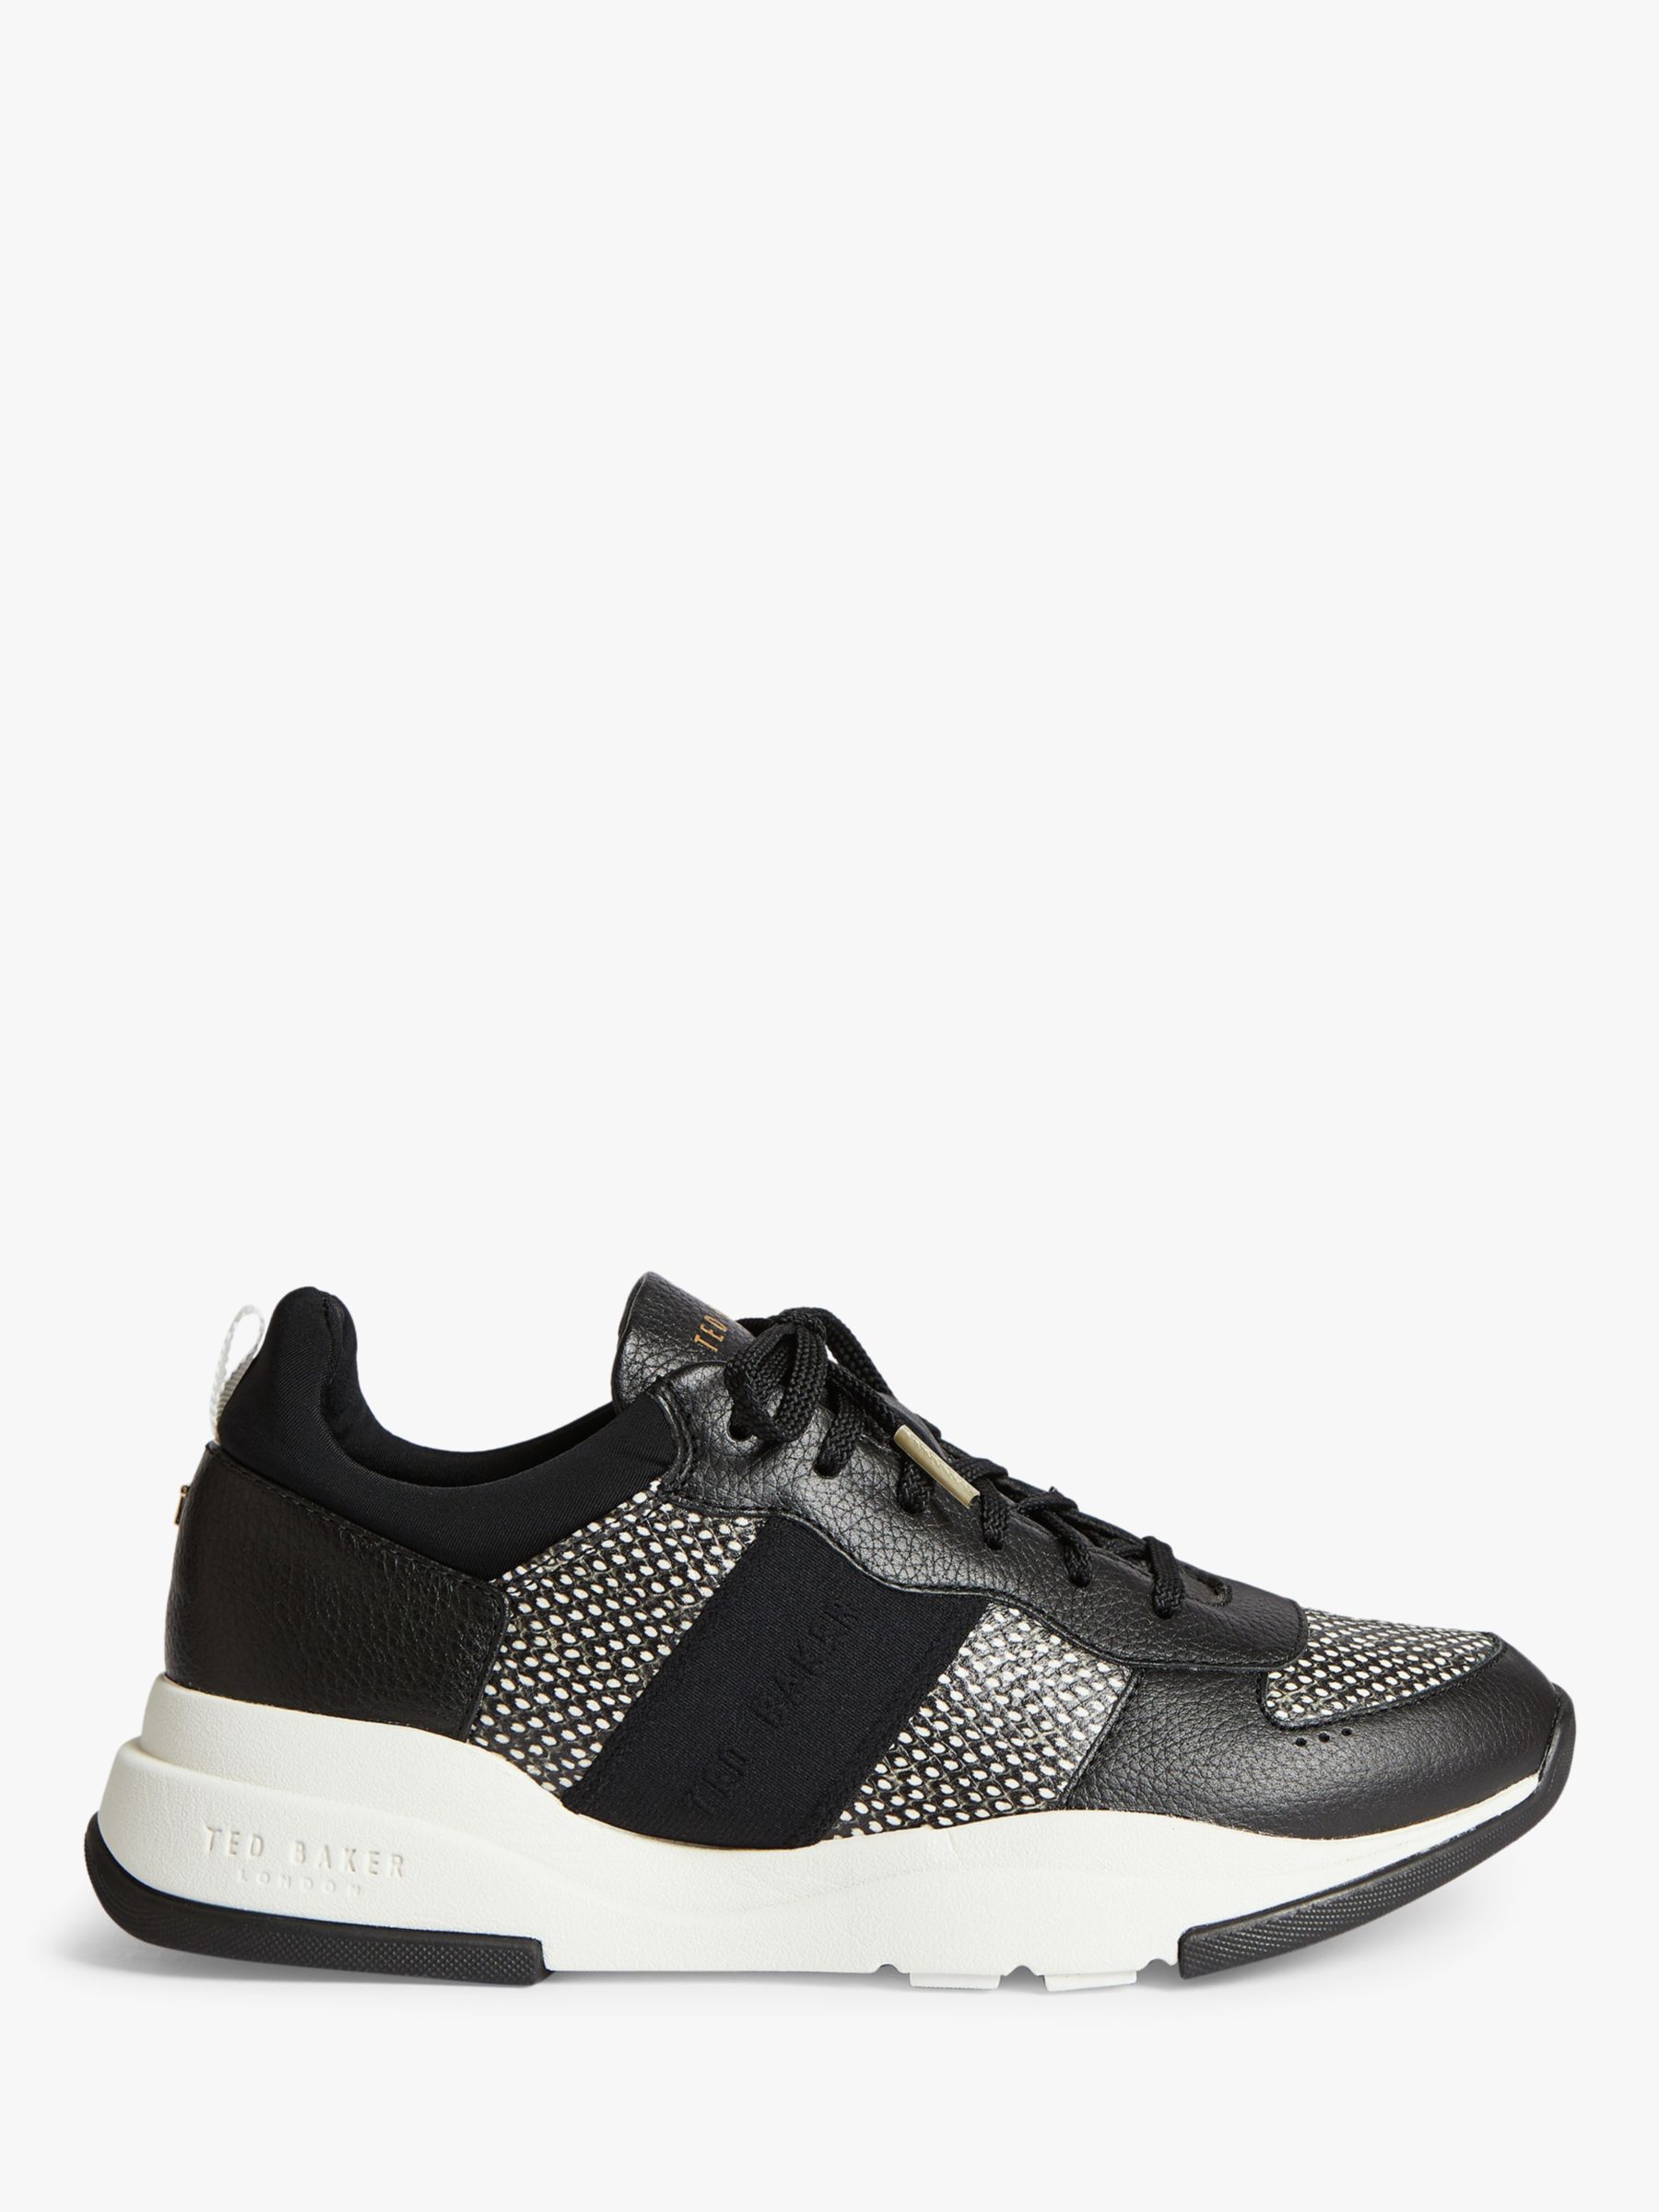 Ted Baker Weverds Trainers, Black